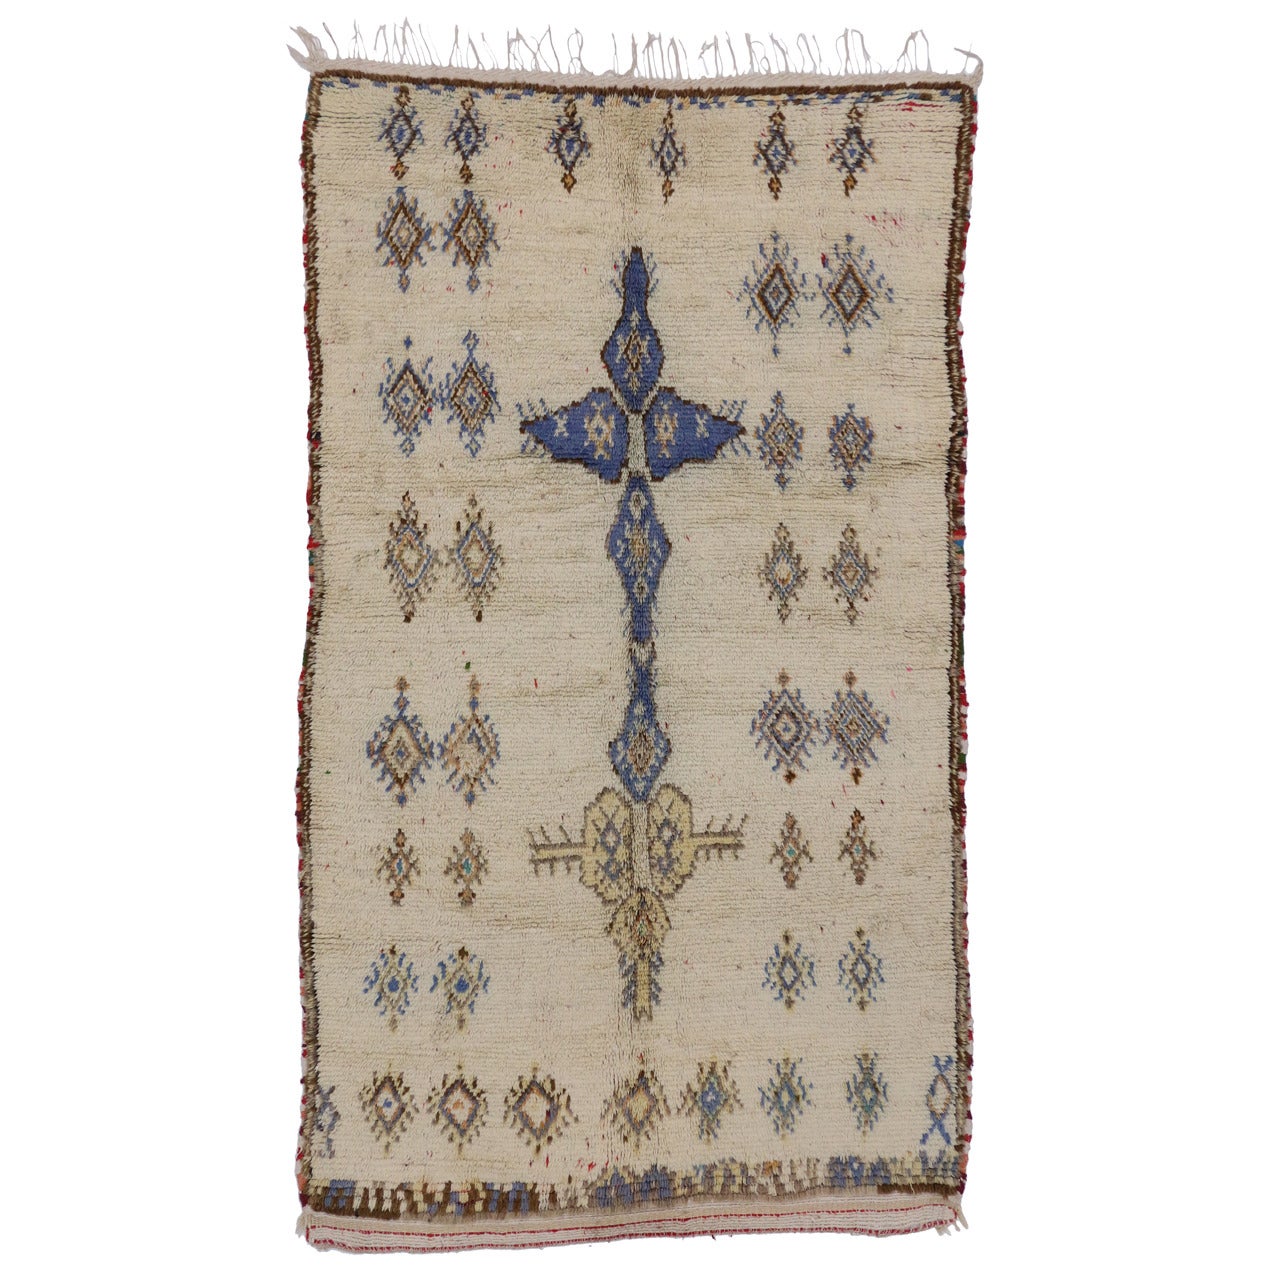 Boho Chic Berber Moroccan Rug with Tribal Design in Light Colors